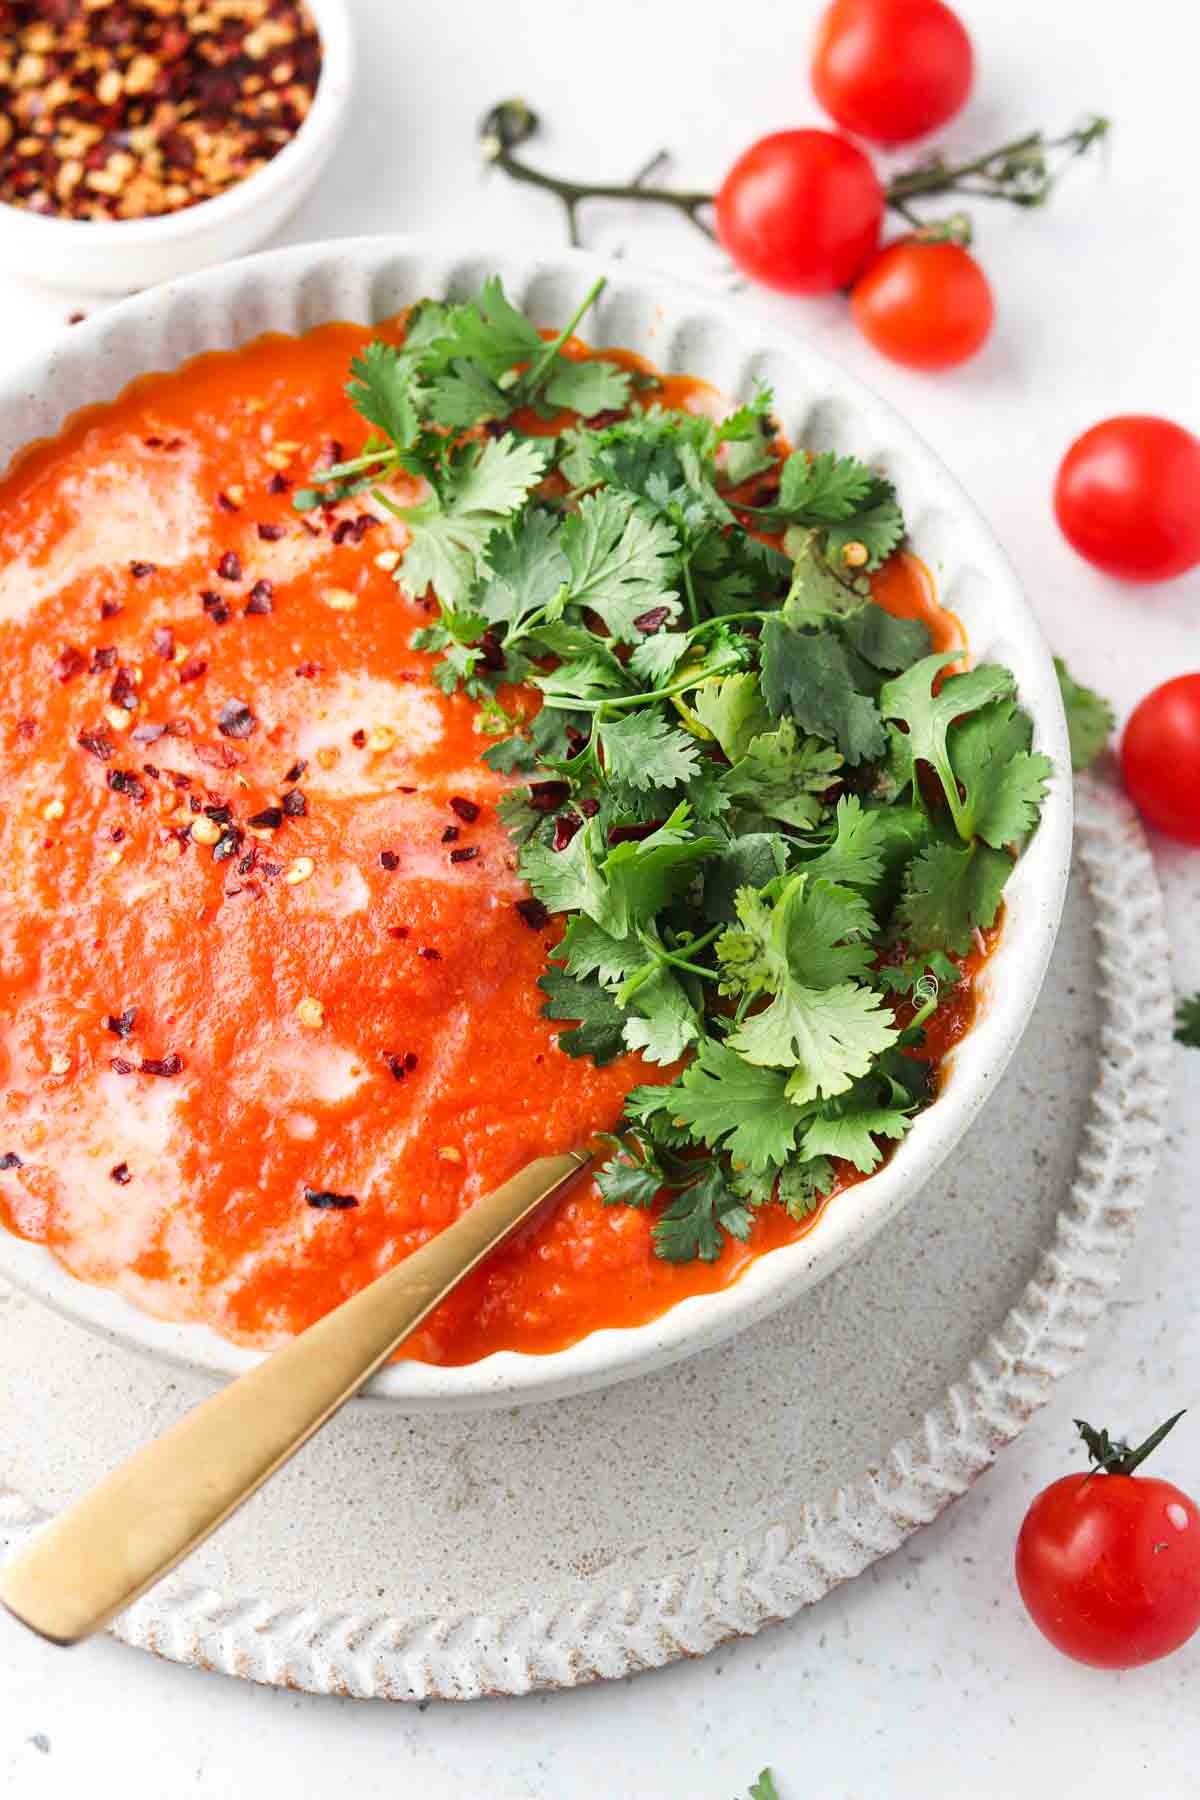 Tomato soup with red pepper flakes and fresh parsley on top.